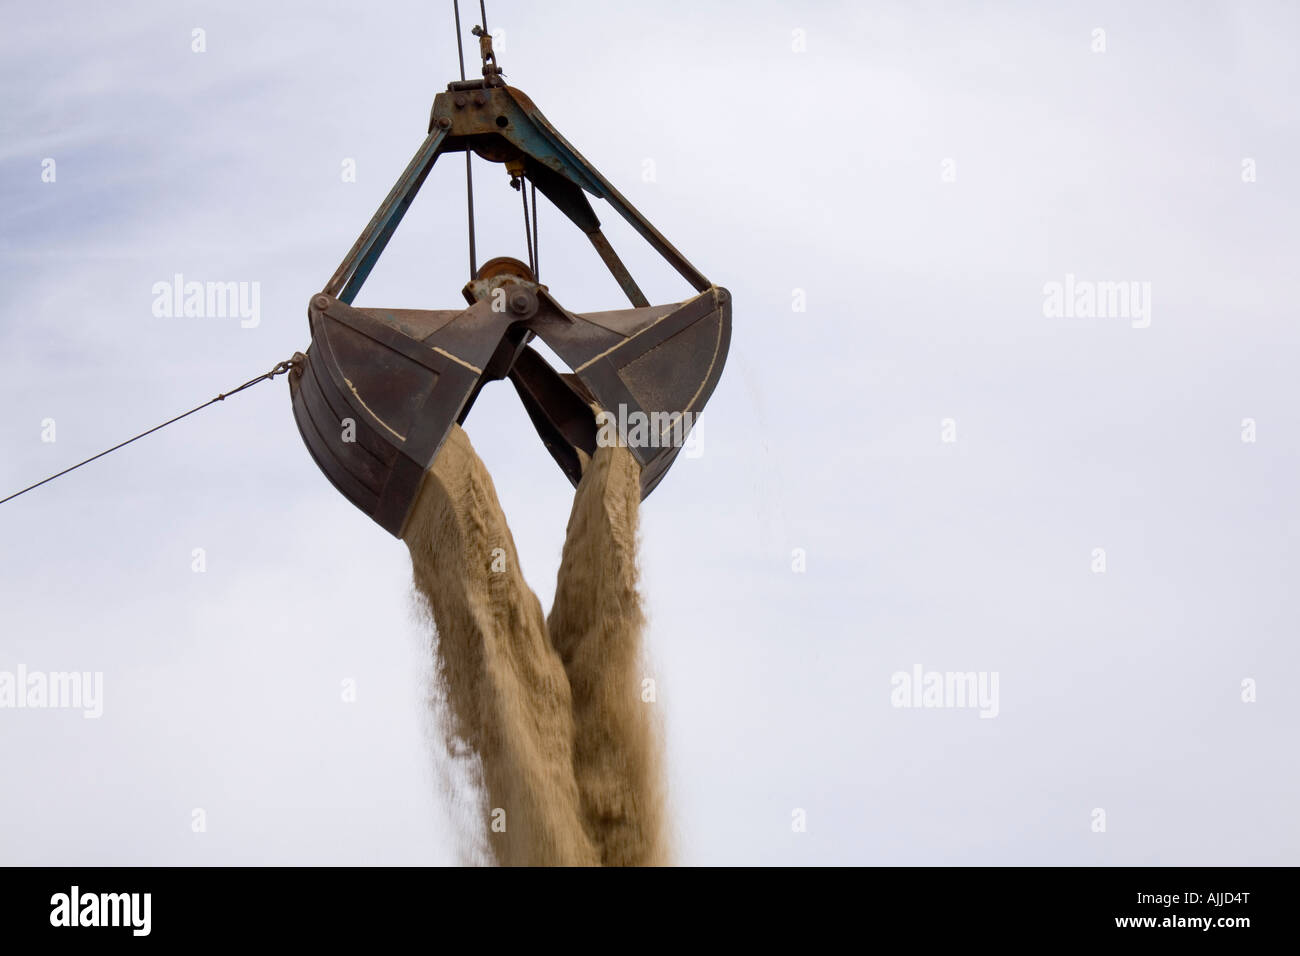 A clamshell bucket loader is seen dumping a load of sand after scooping it out of the hold of a cargo ship. Stock Photo